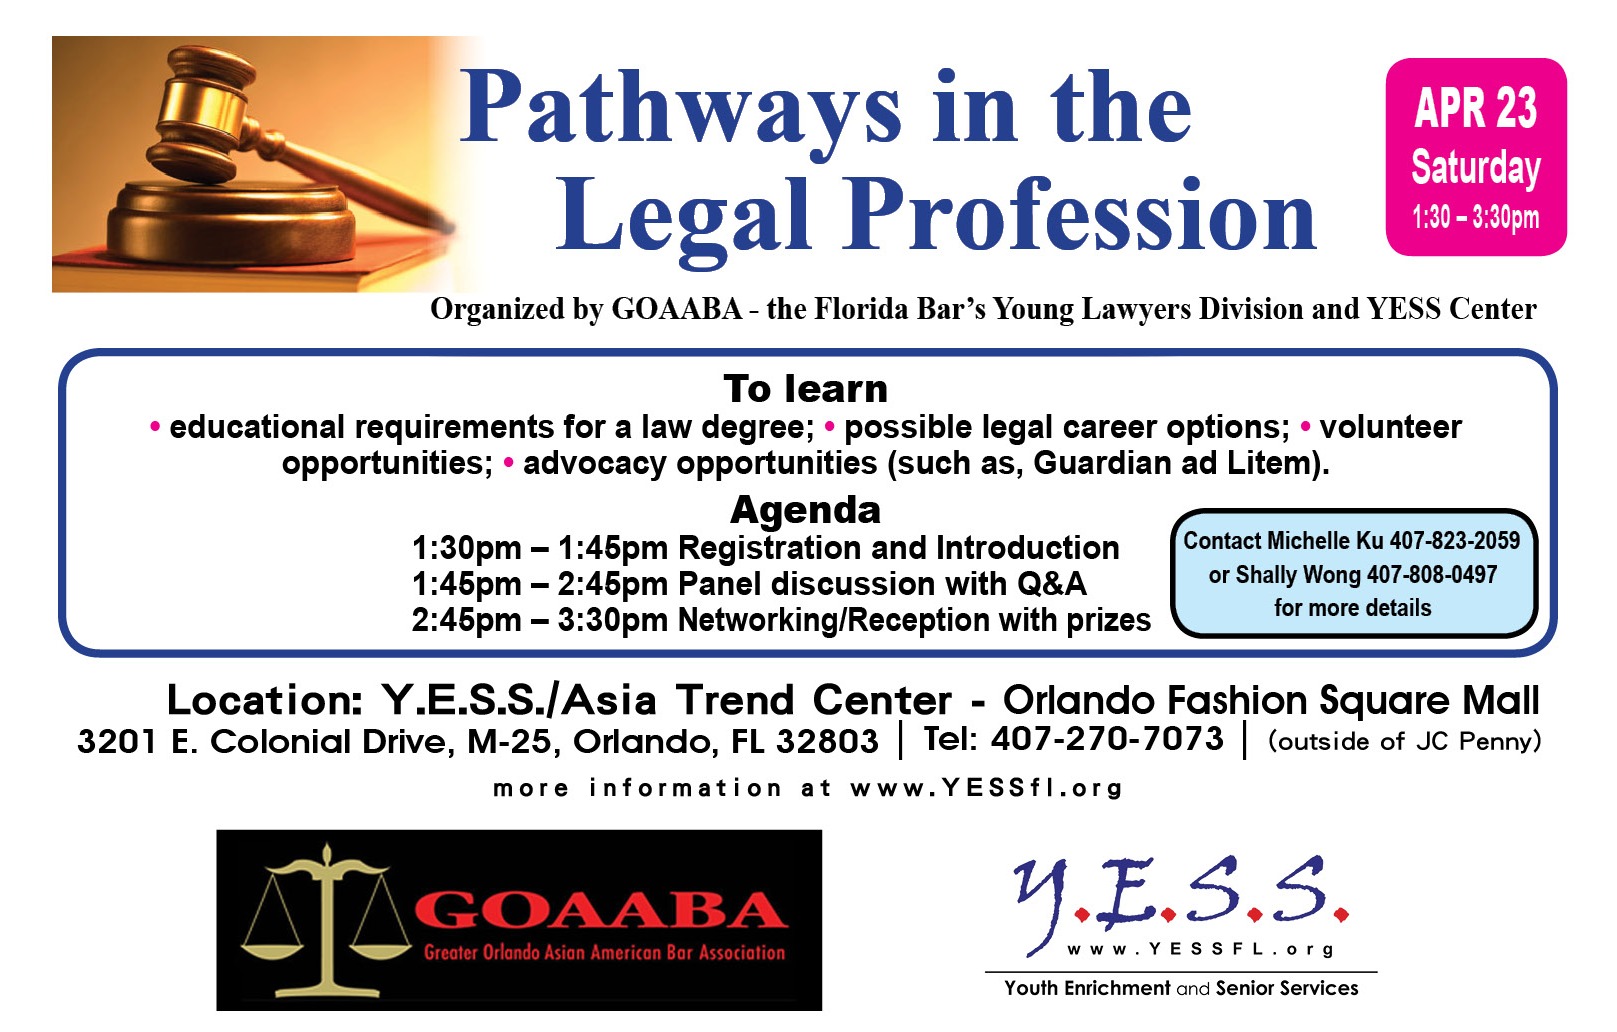 Pathways in the Legal Profession - FREE Seminar